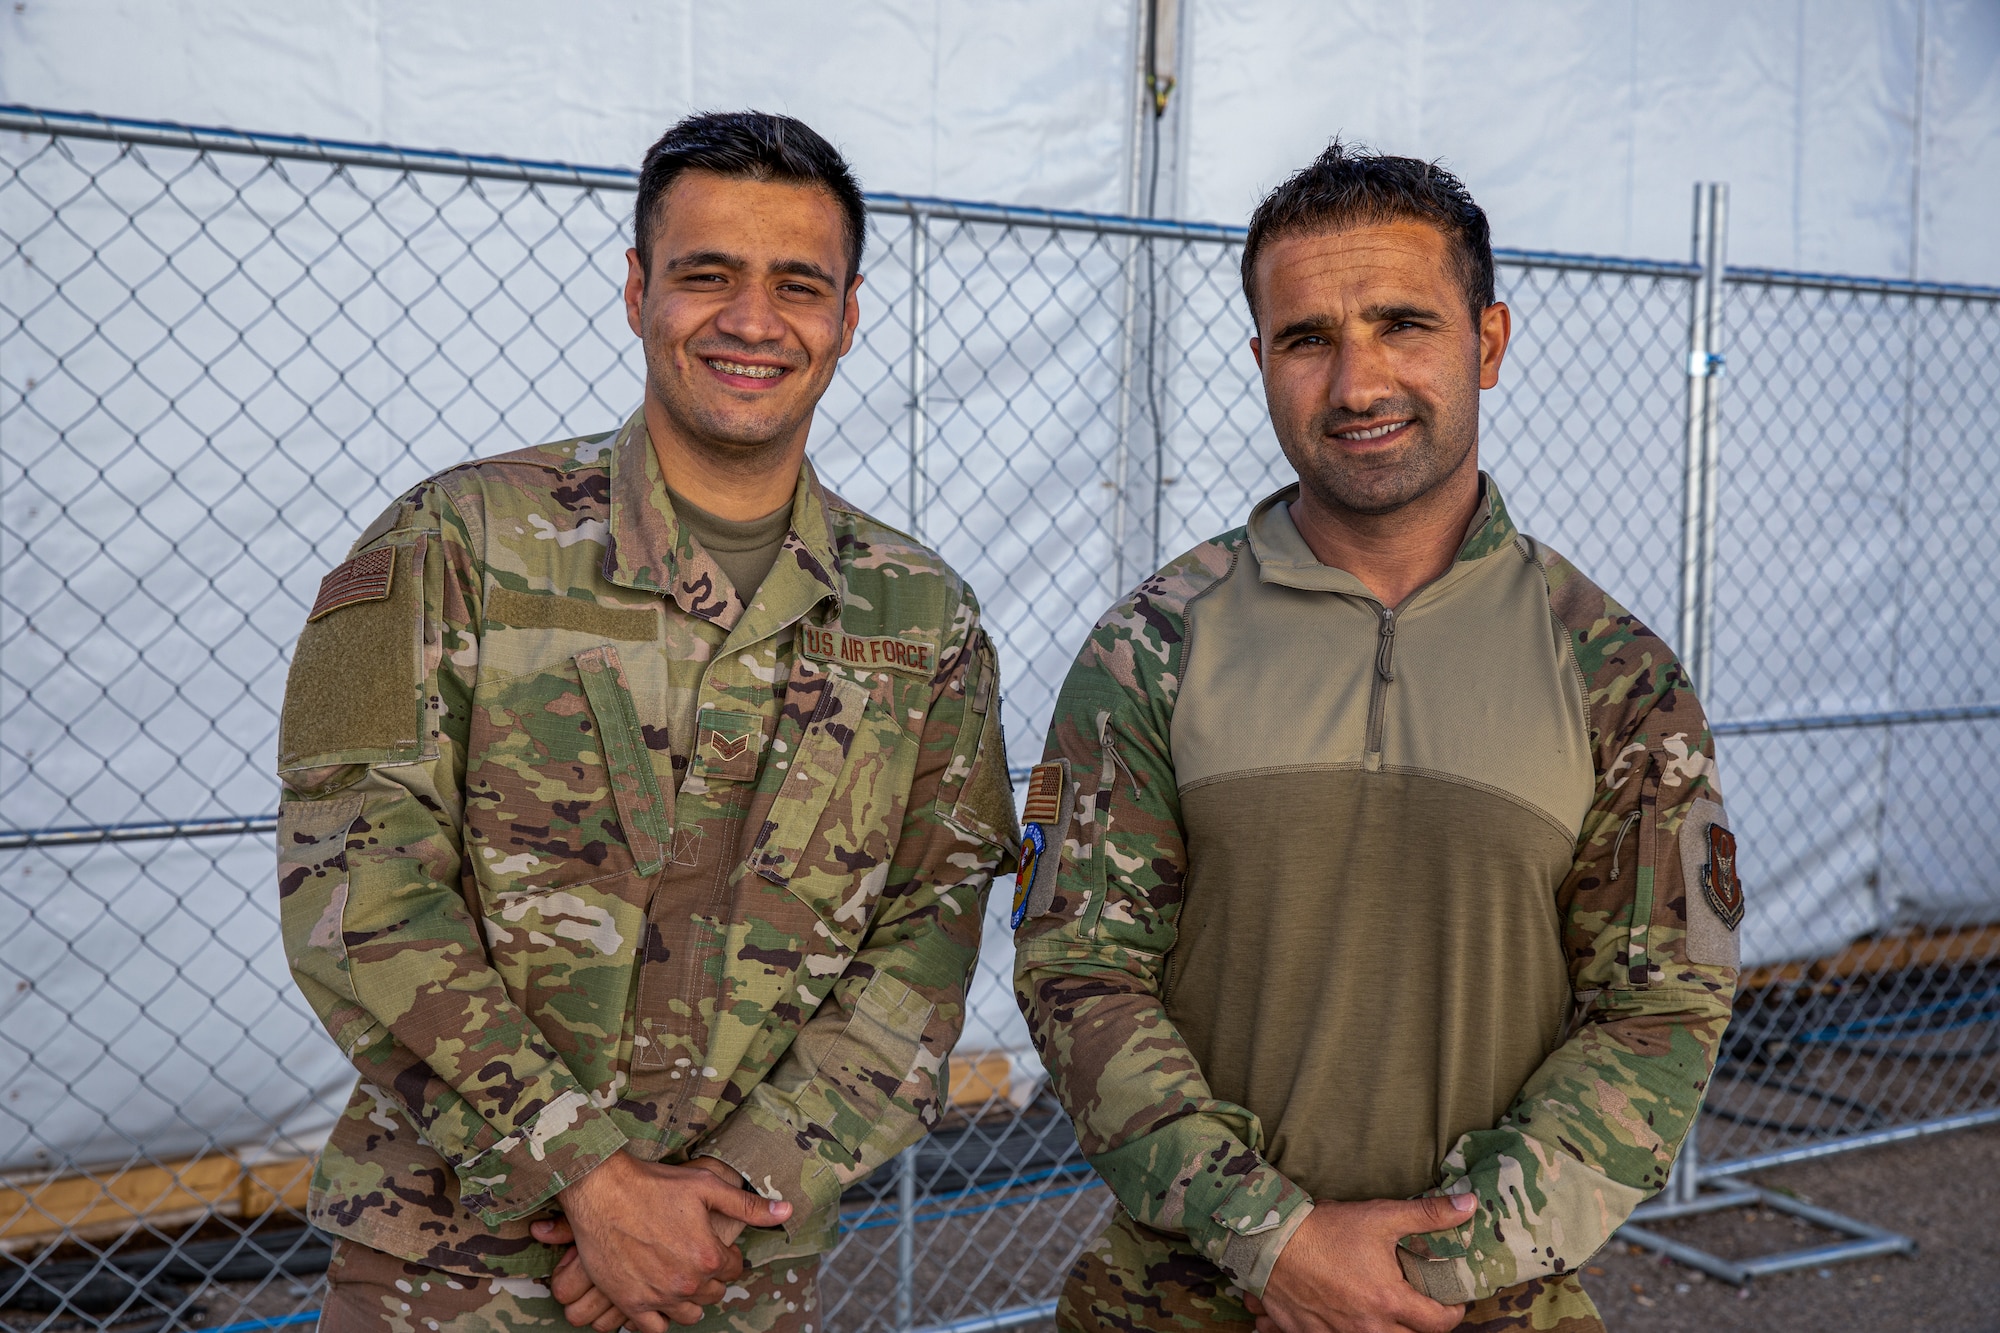 Photo of Senior Airman Kalimullah Ghorbandi (left) and Airman 1st Class Ahmed Sofizada (right) , both linguists assigned to Task Force Holloman.